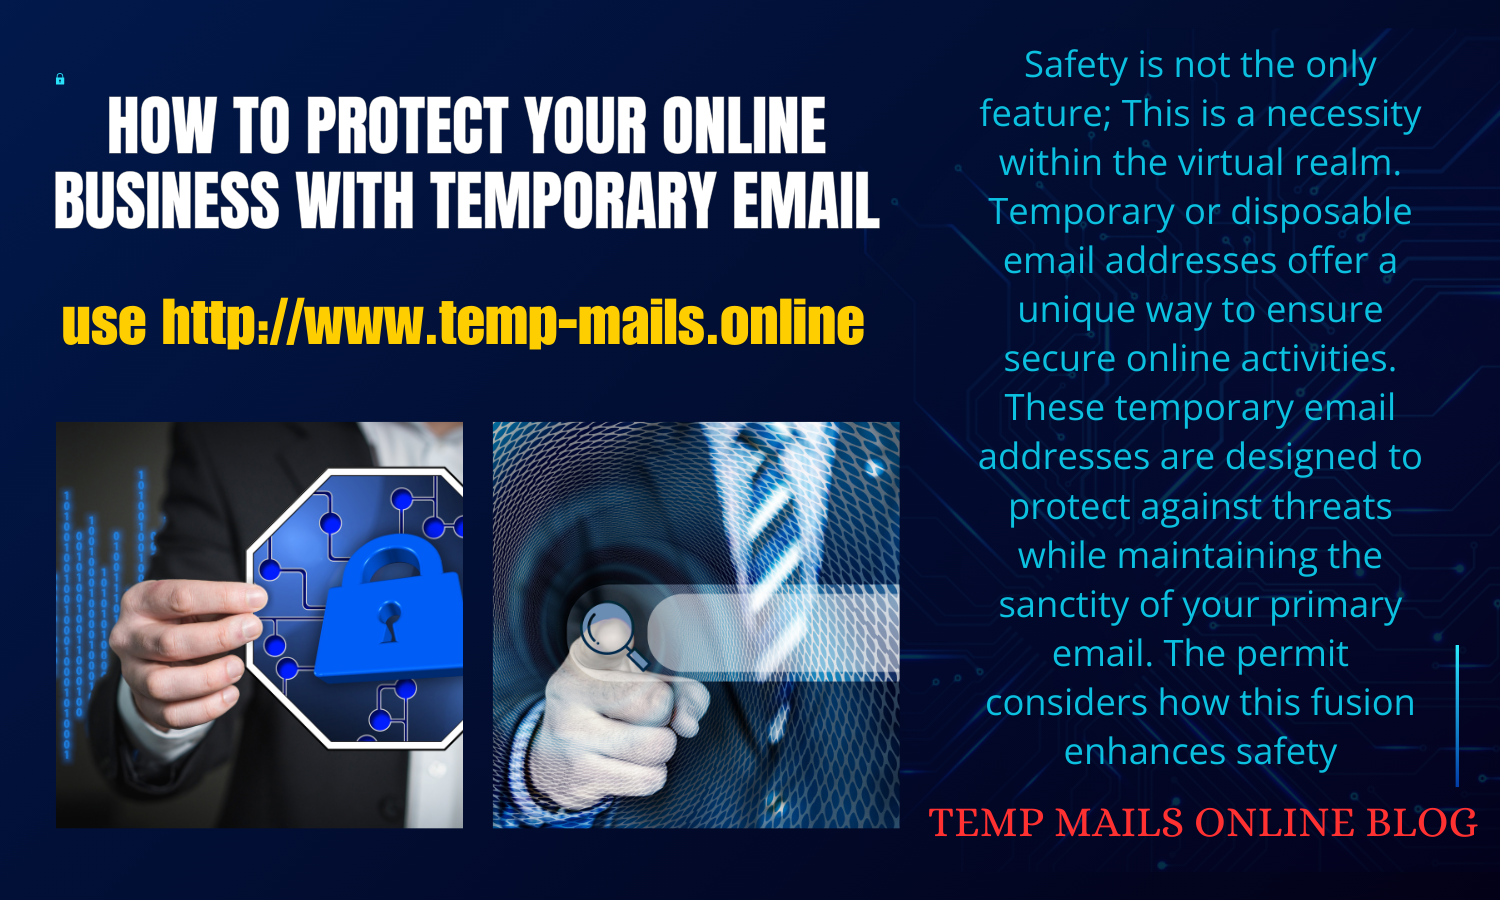 How To Protect Your Business Online With Temporary Emails!